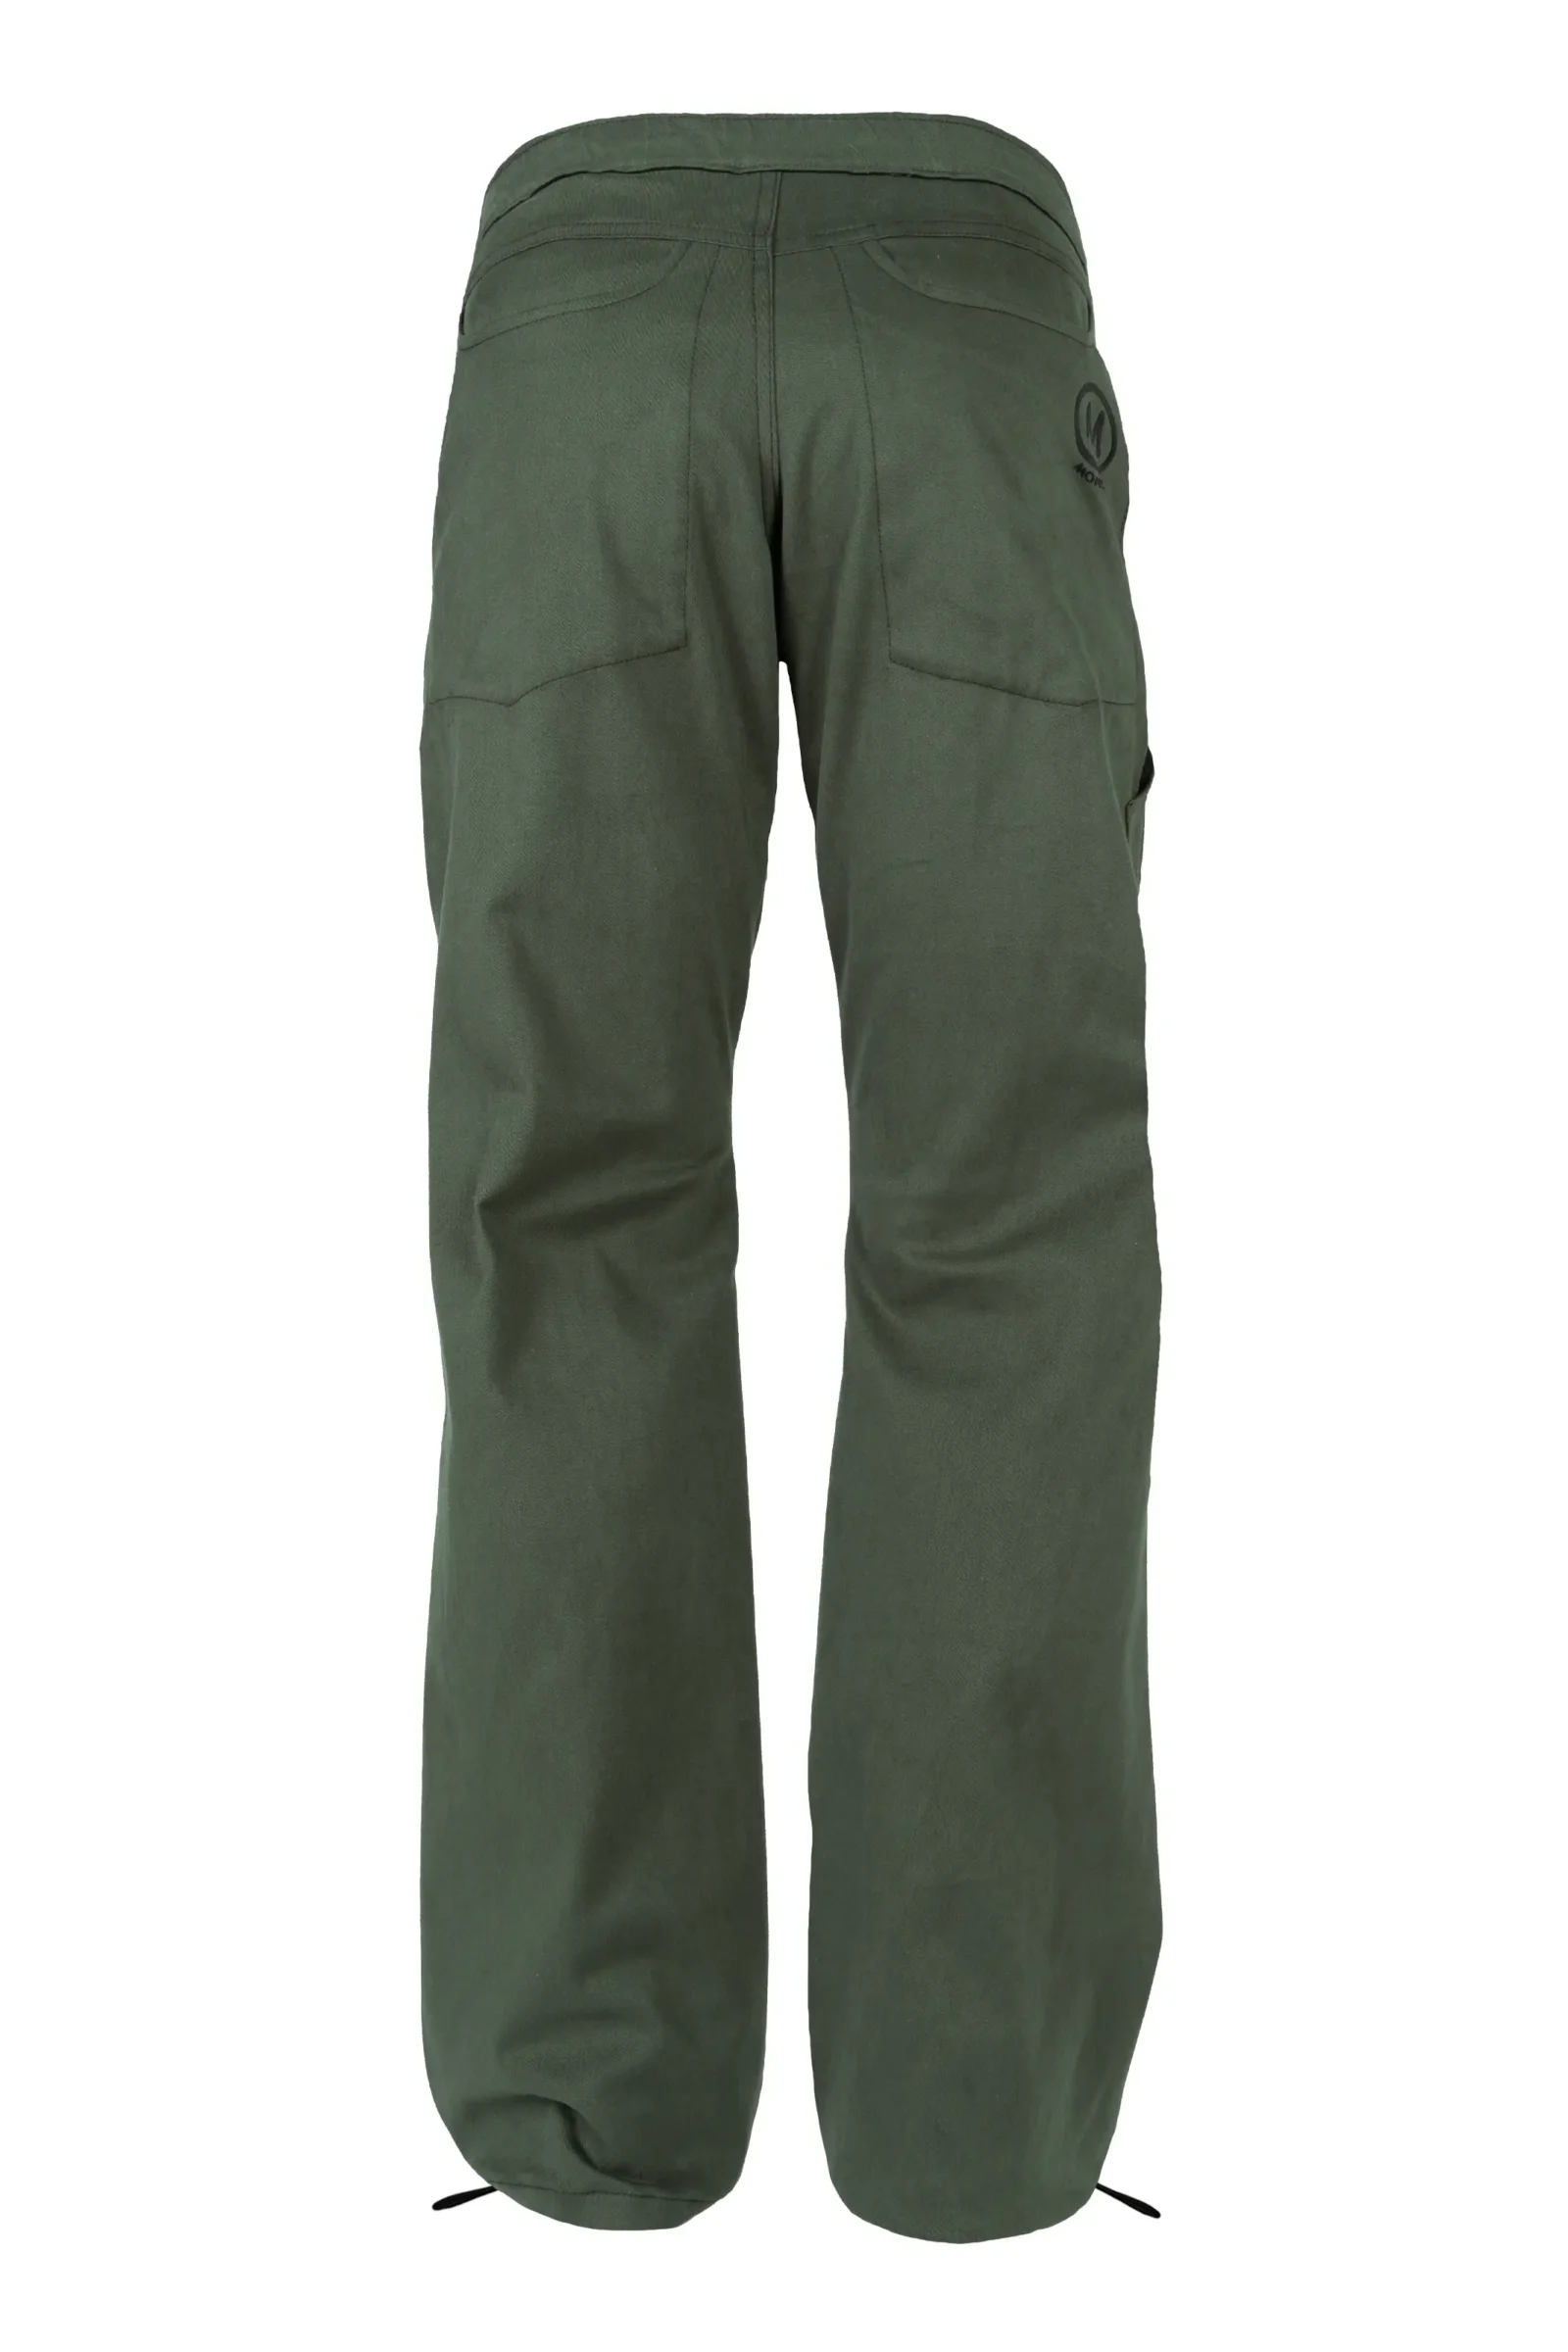 Men's climbing trousers - forest green - CLYDE Monvic